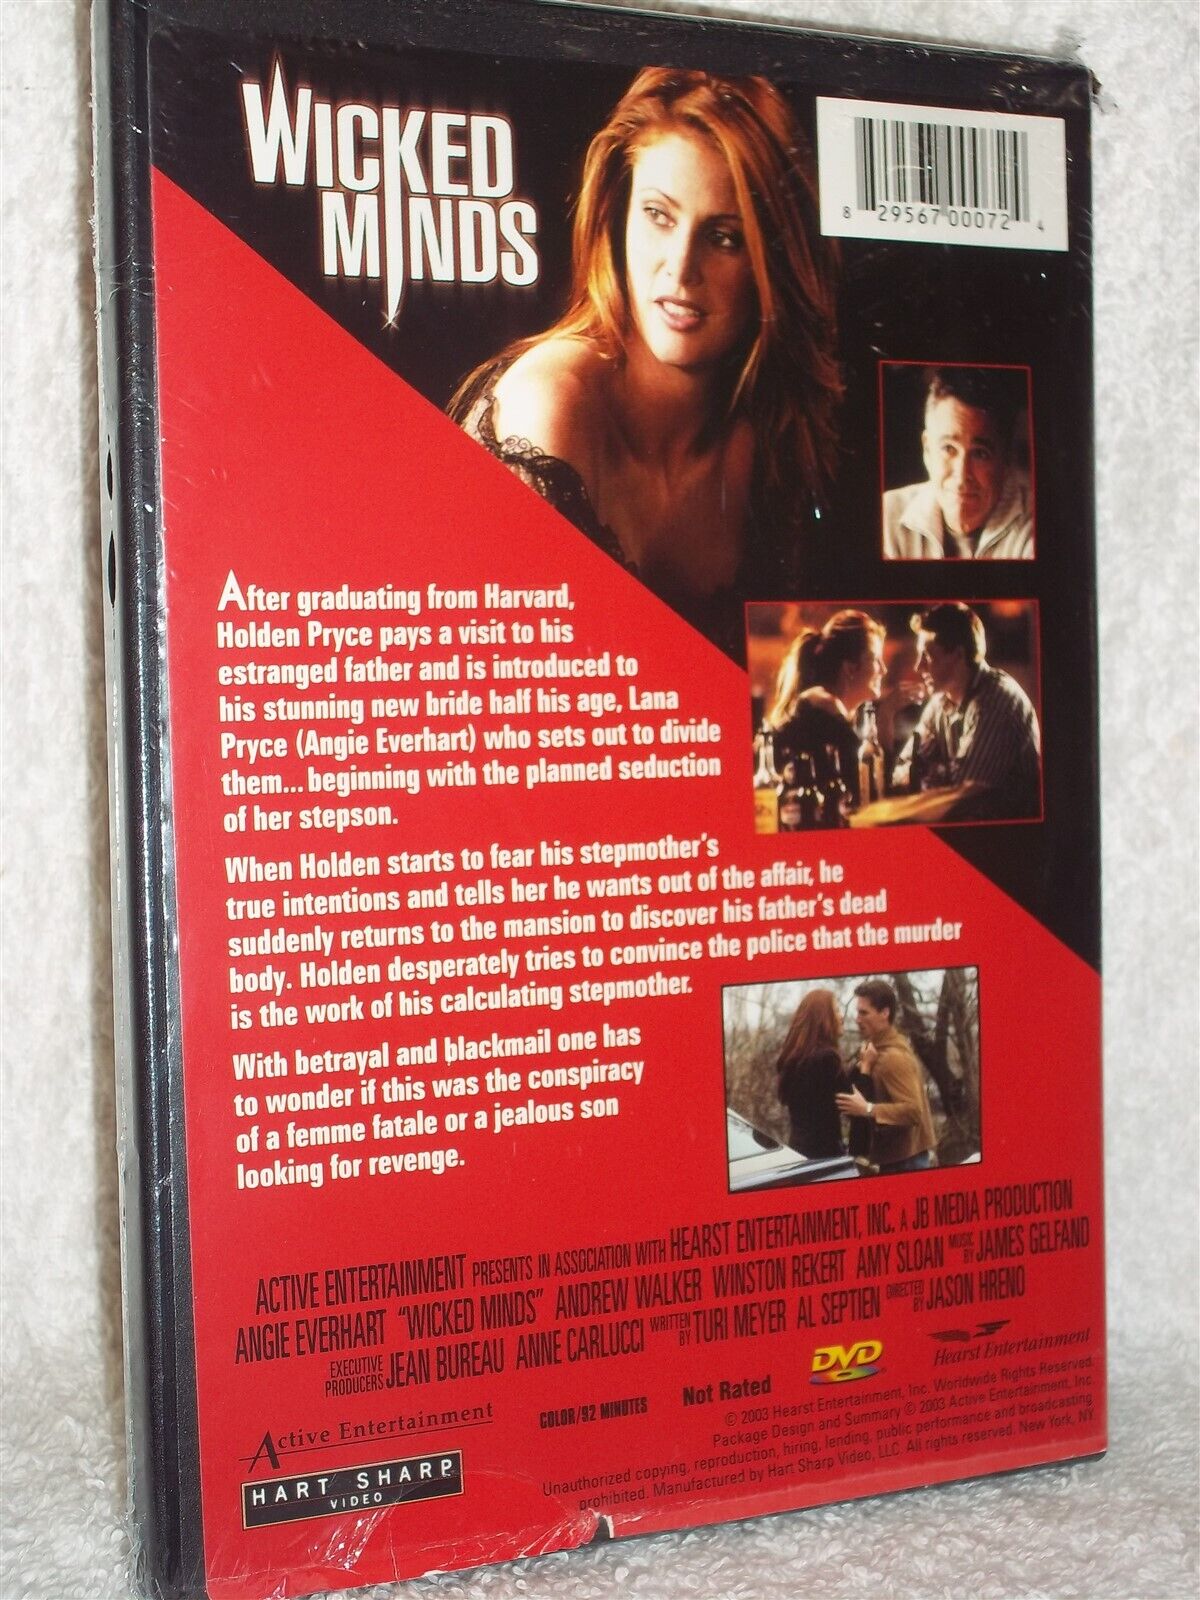 charlene board recommends angie everhart wicked minds pic